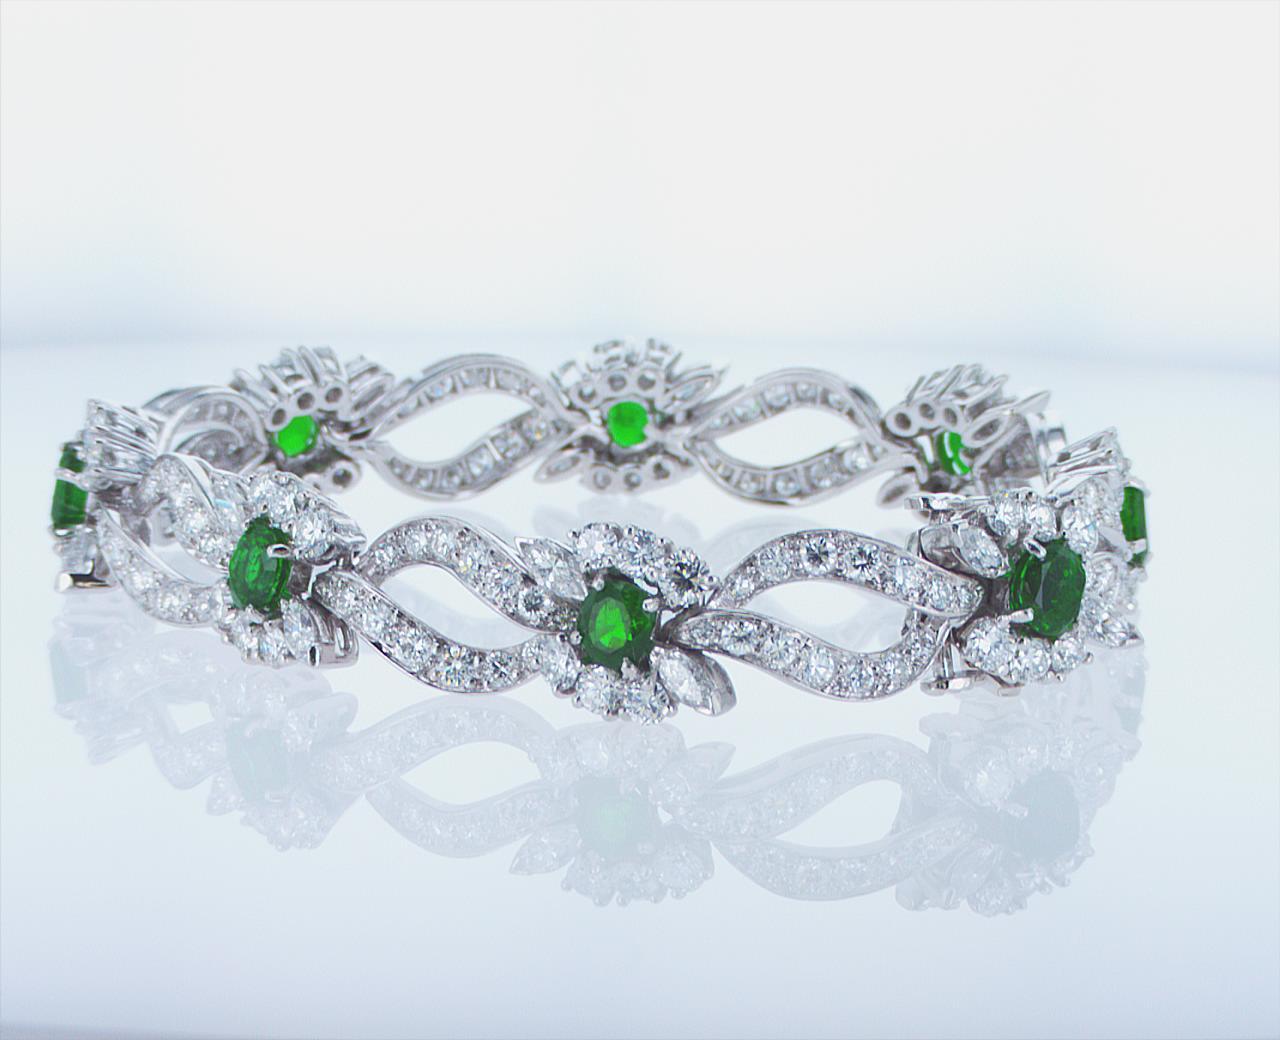 Platinum Bracelet featuring 3.37ct Total Weight of Emeralds, 6.74ct Total Weight of Round Diamonds, and 1.48ct Total Weight of Marquis Diamonds. 6.75-inch Length.
